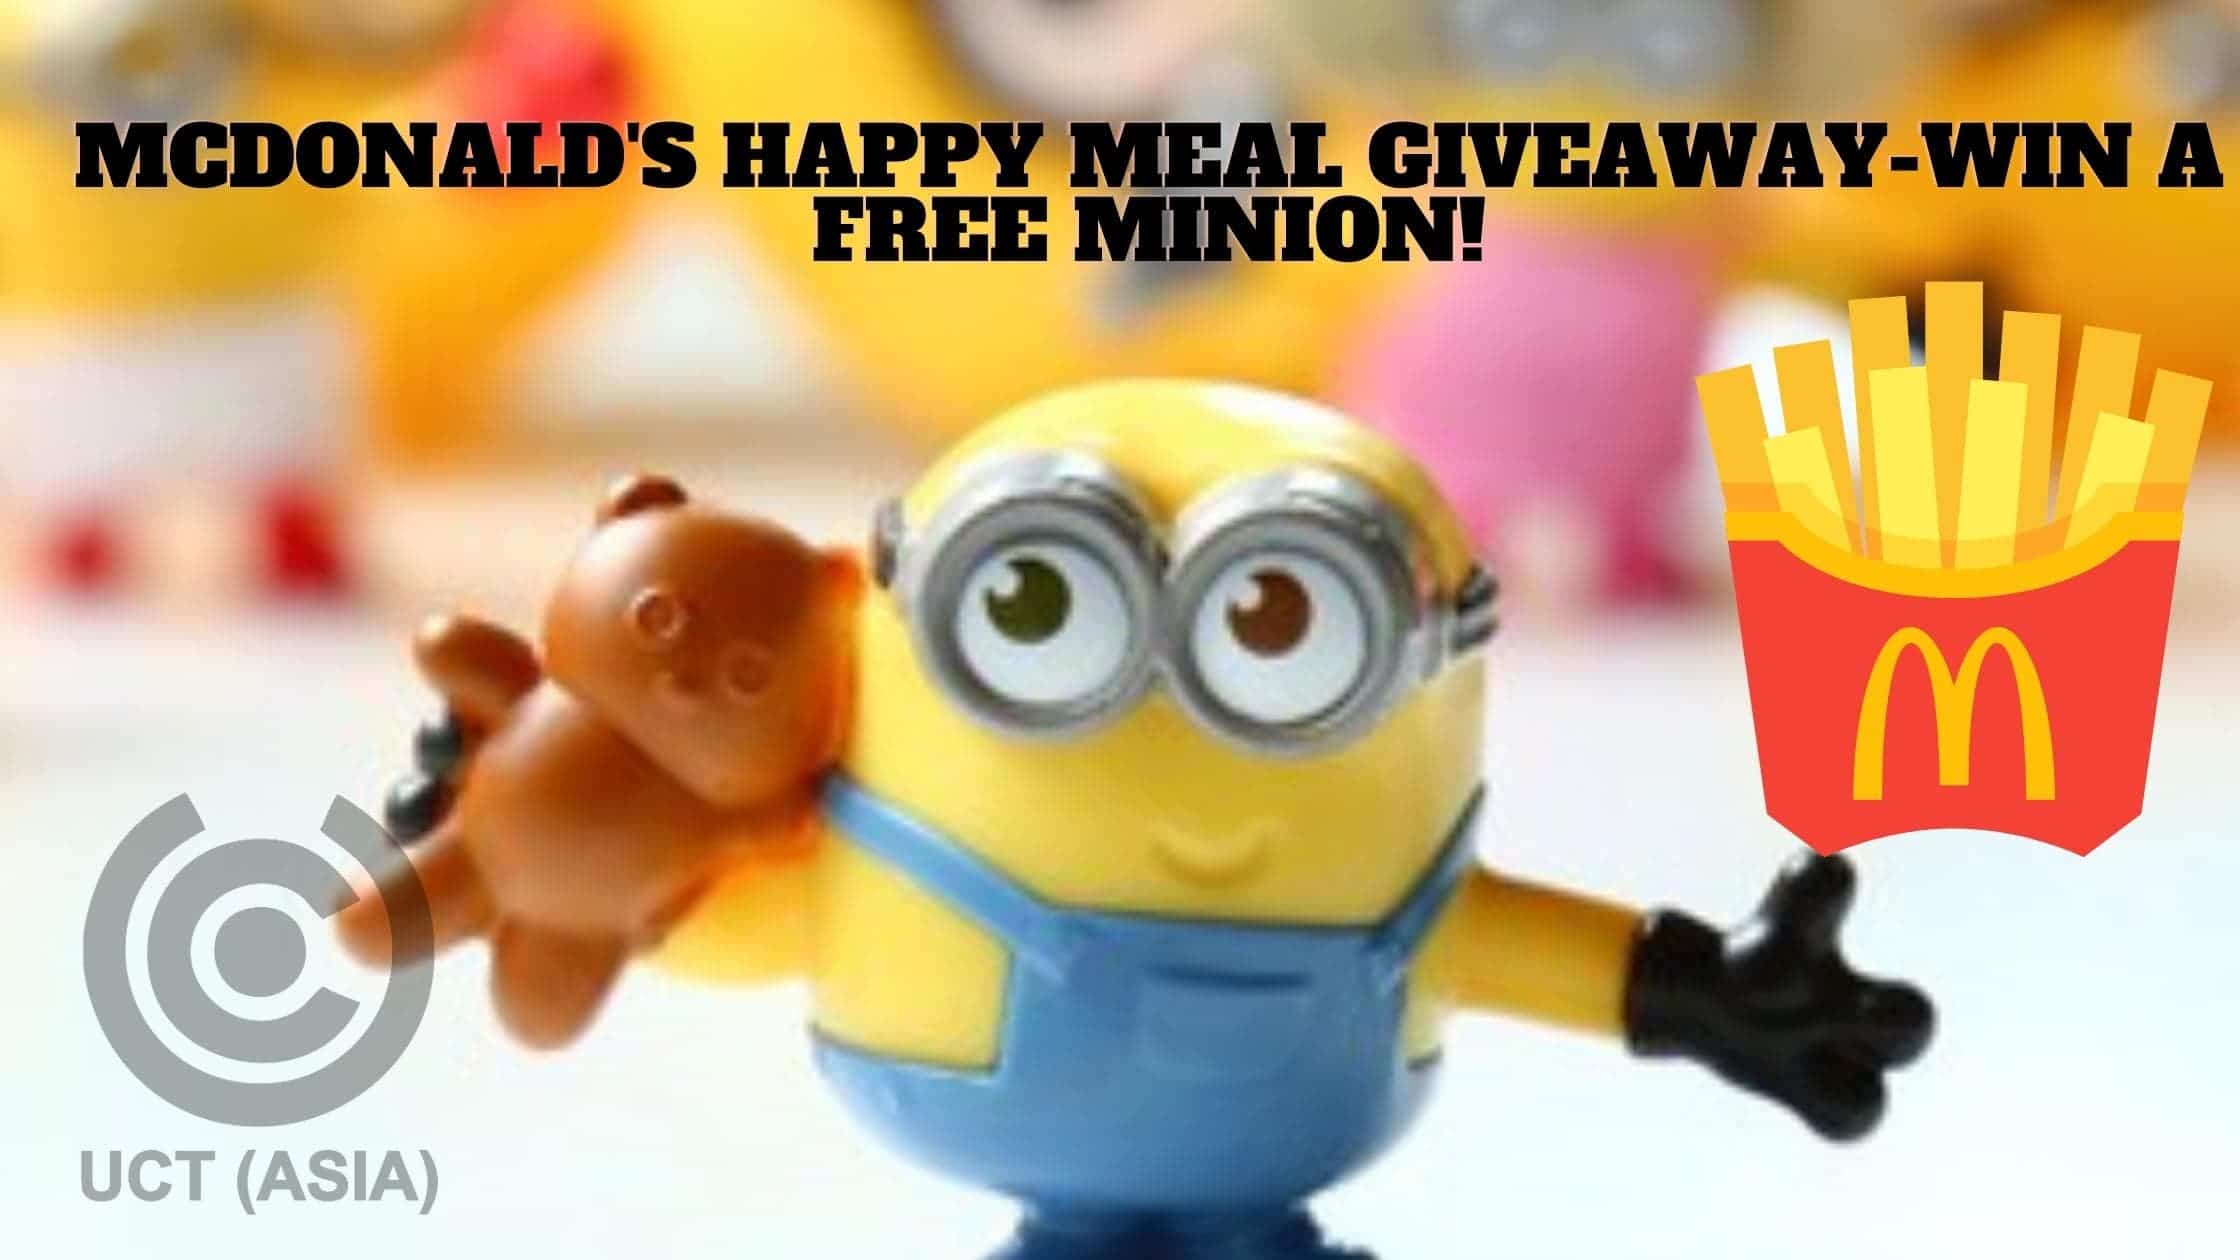 McDonald's Happy Meal Giveaway-Win a Free Minion! - UCT (Asia)